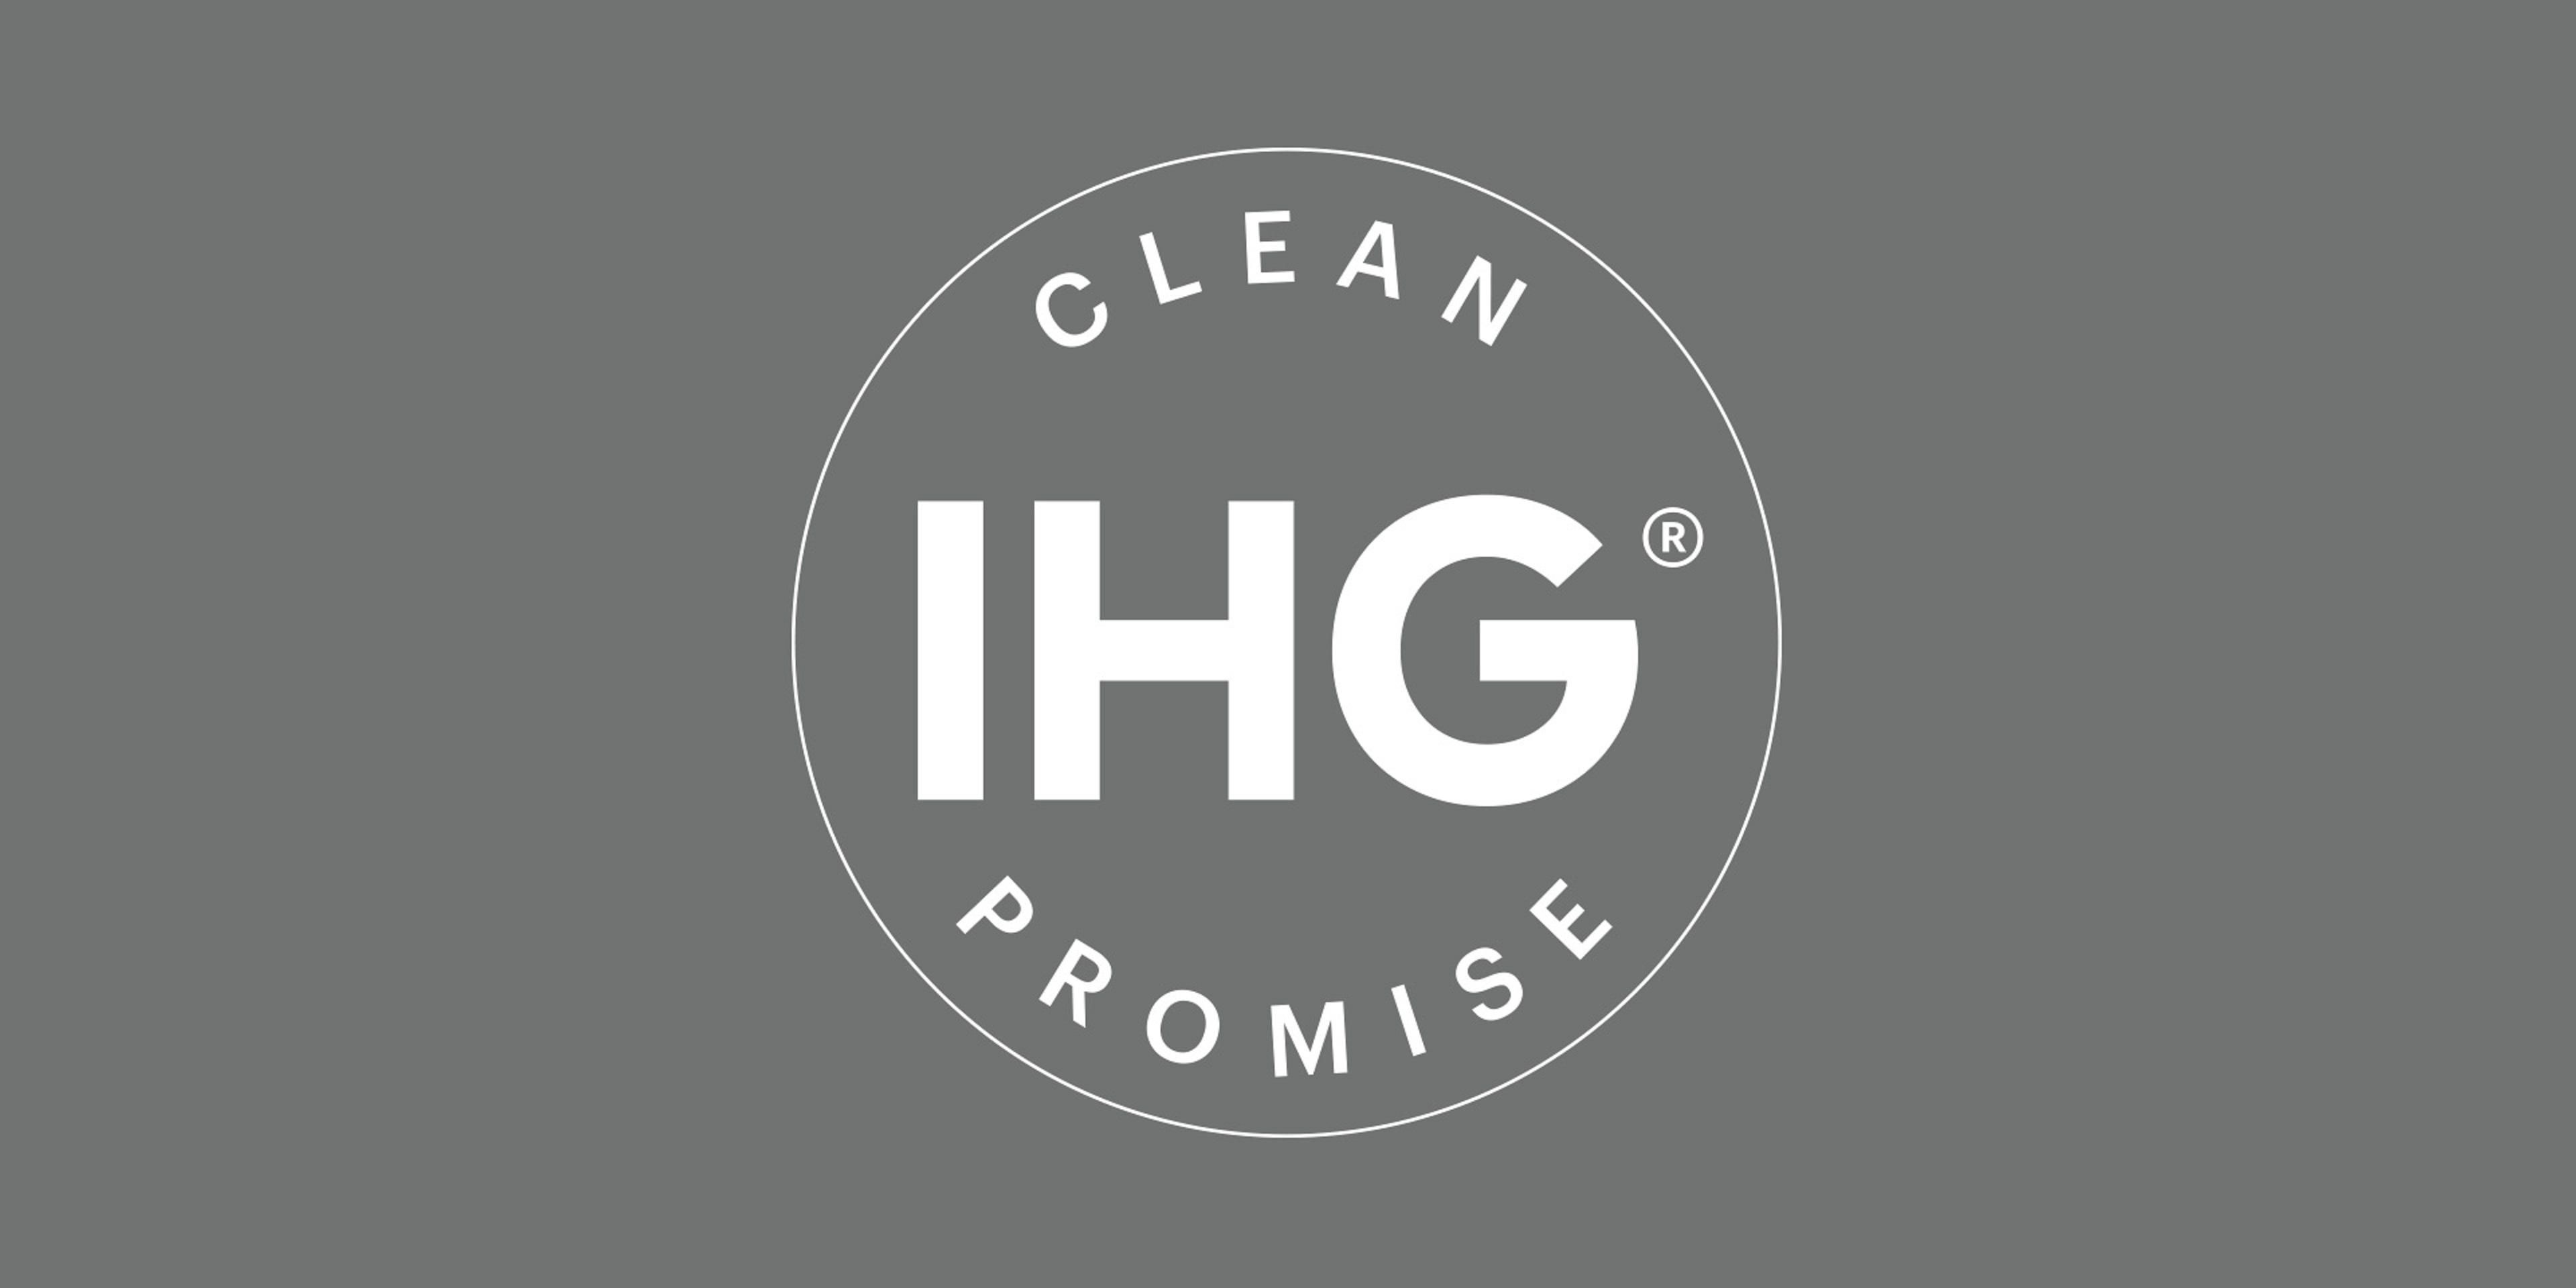 IHG has a long-standing commitment to rigorous cleaning procedures.  The IHG Way of Clean program is now being expanded with additional COVID-19 protocols and best practices.